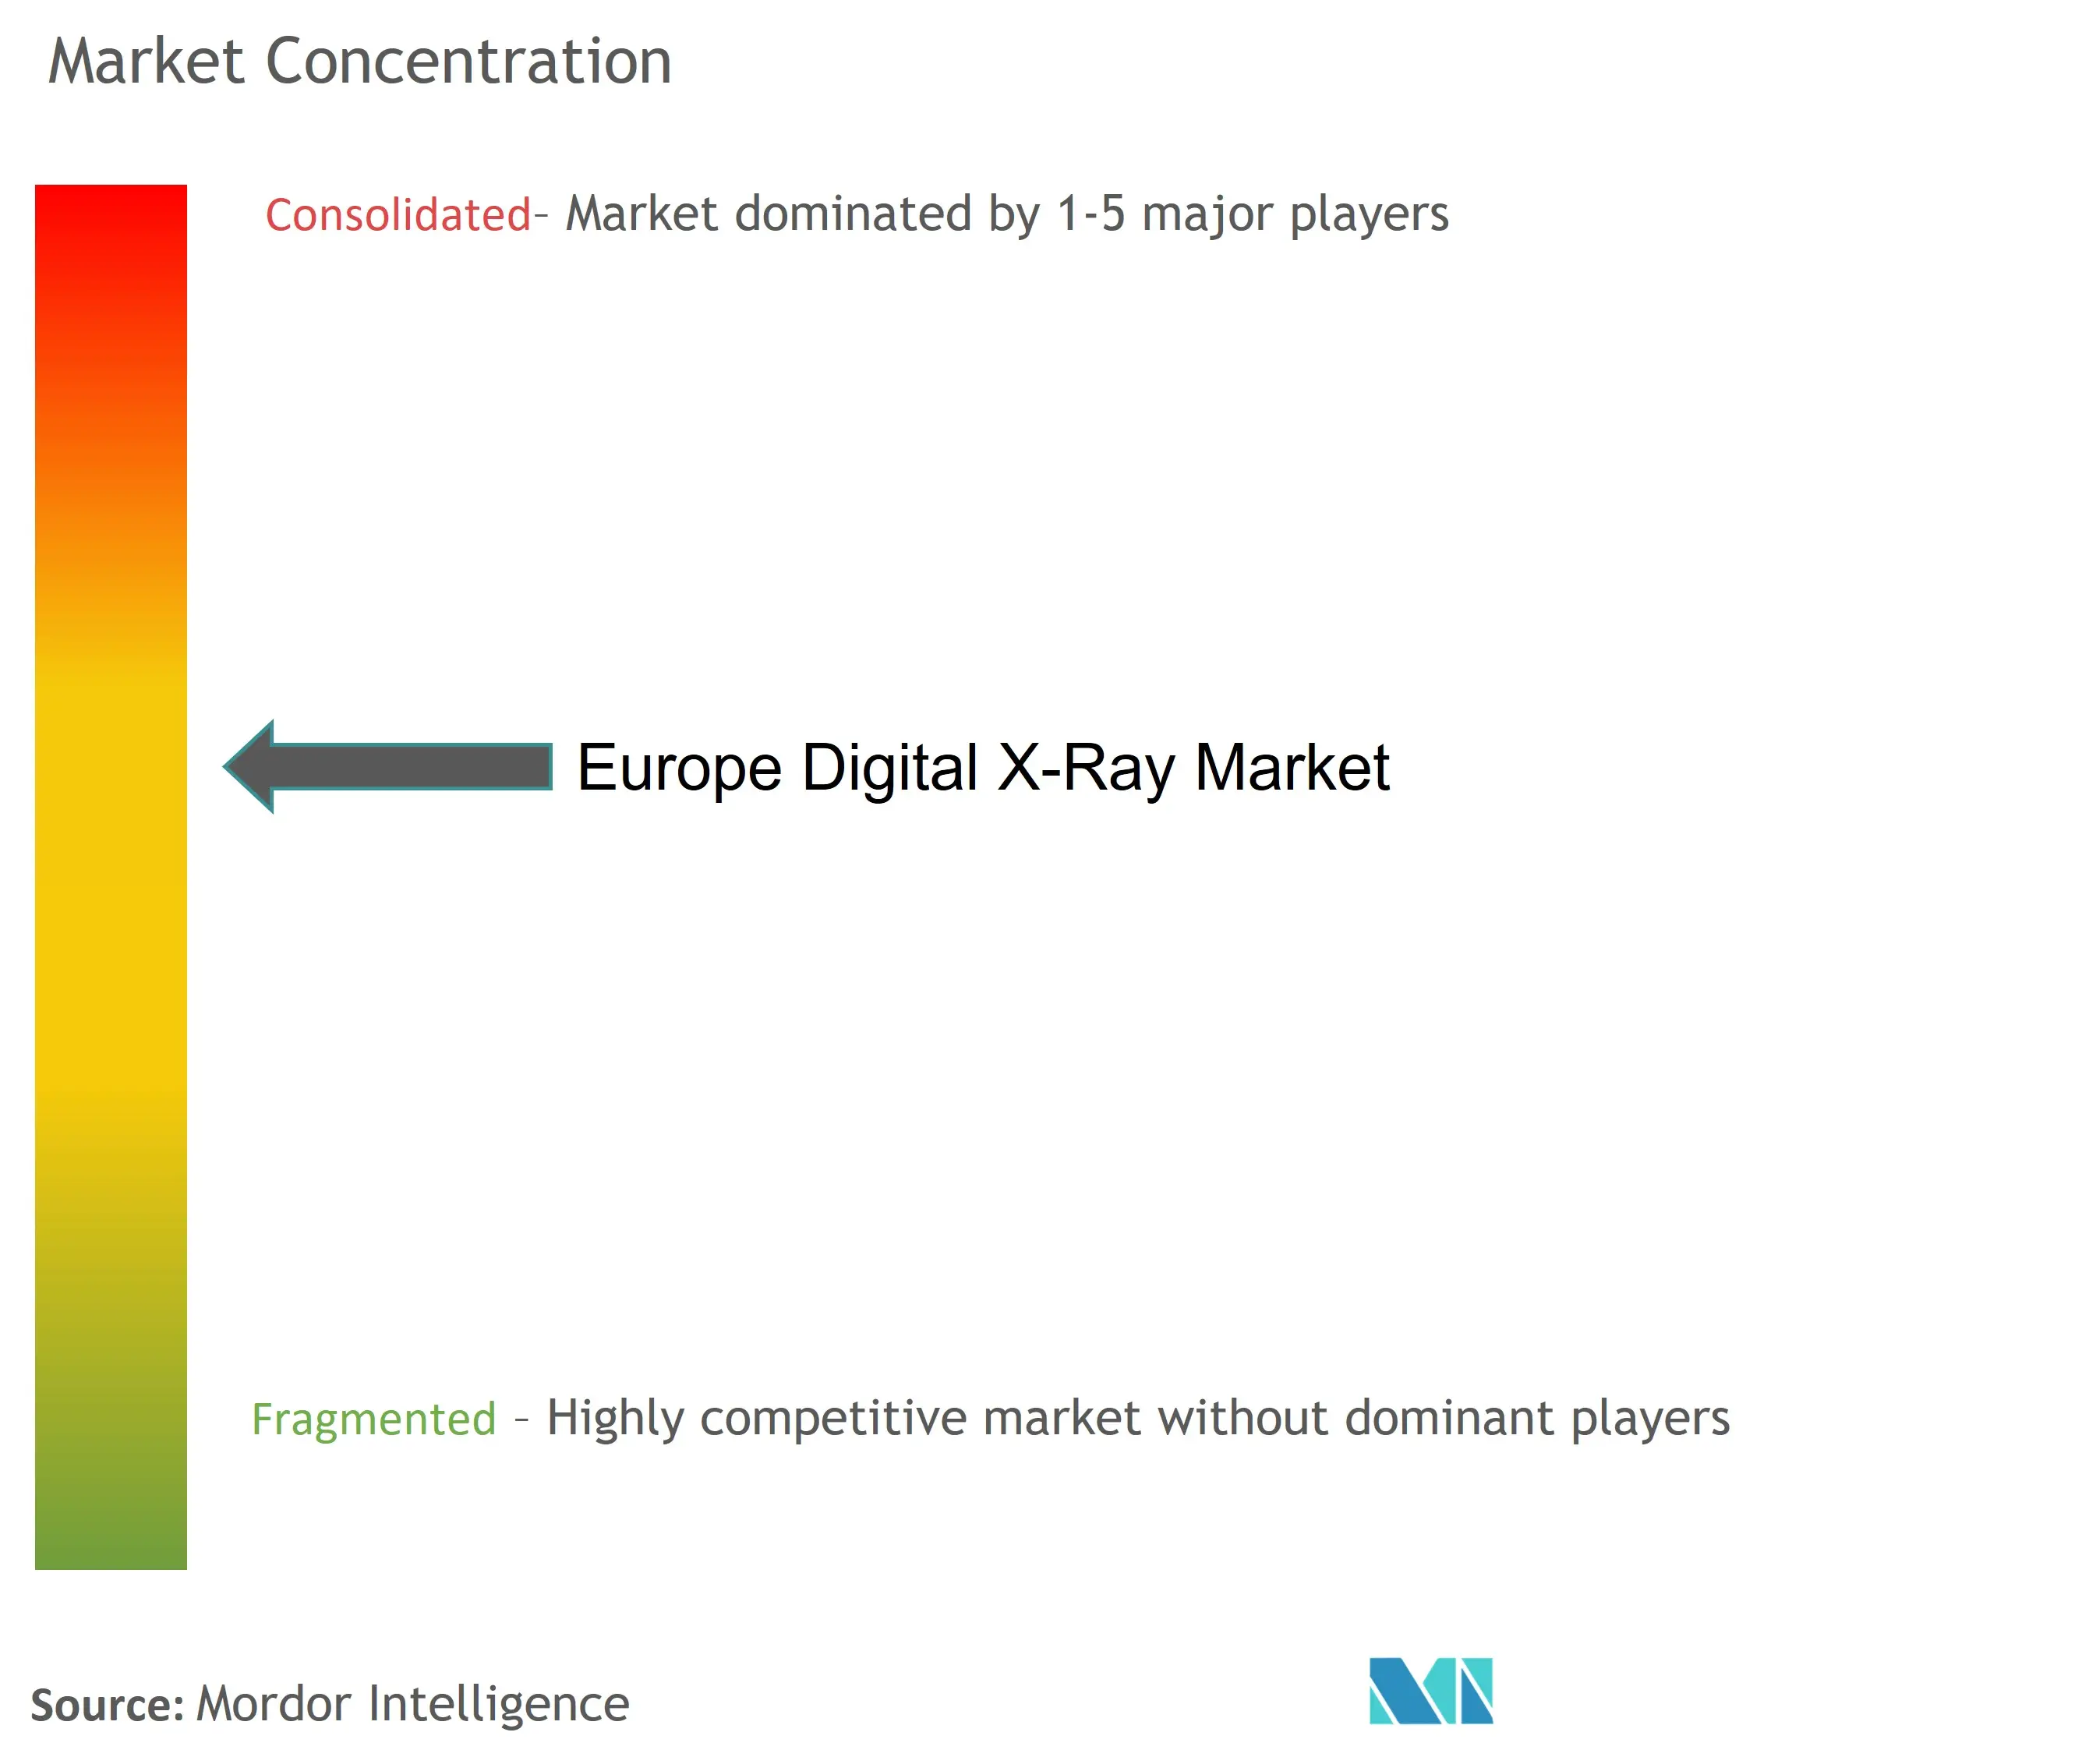 Europe Digital X-Ray Market Concentration